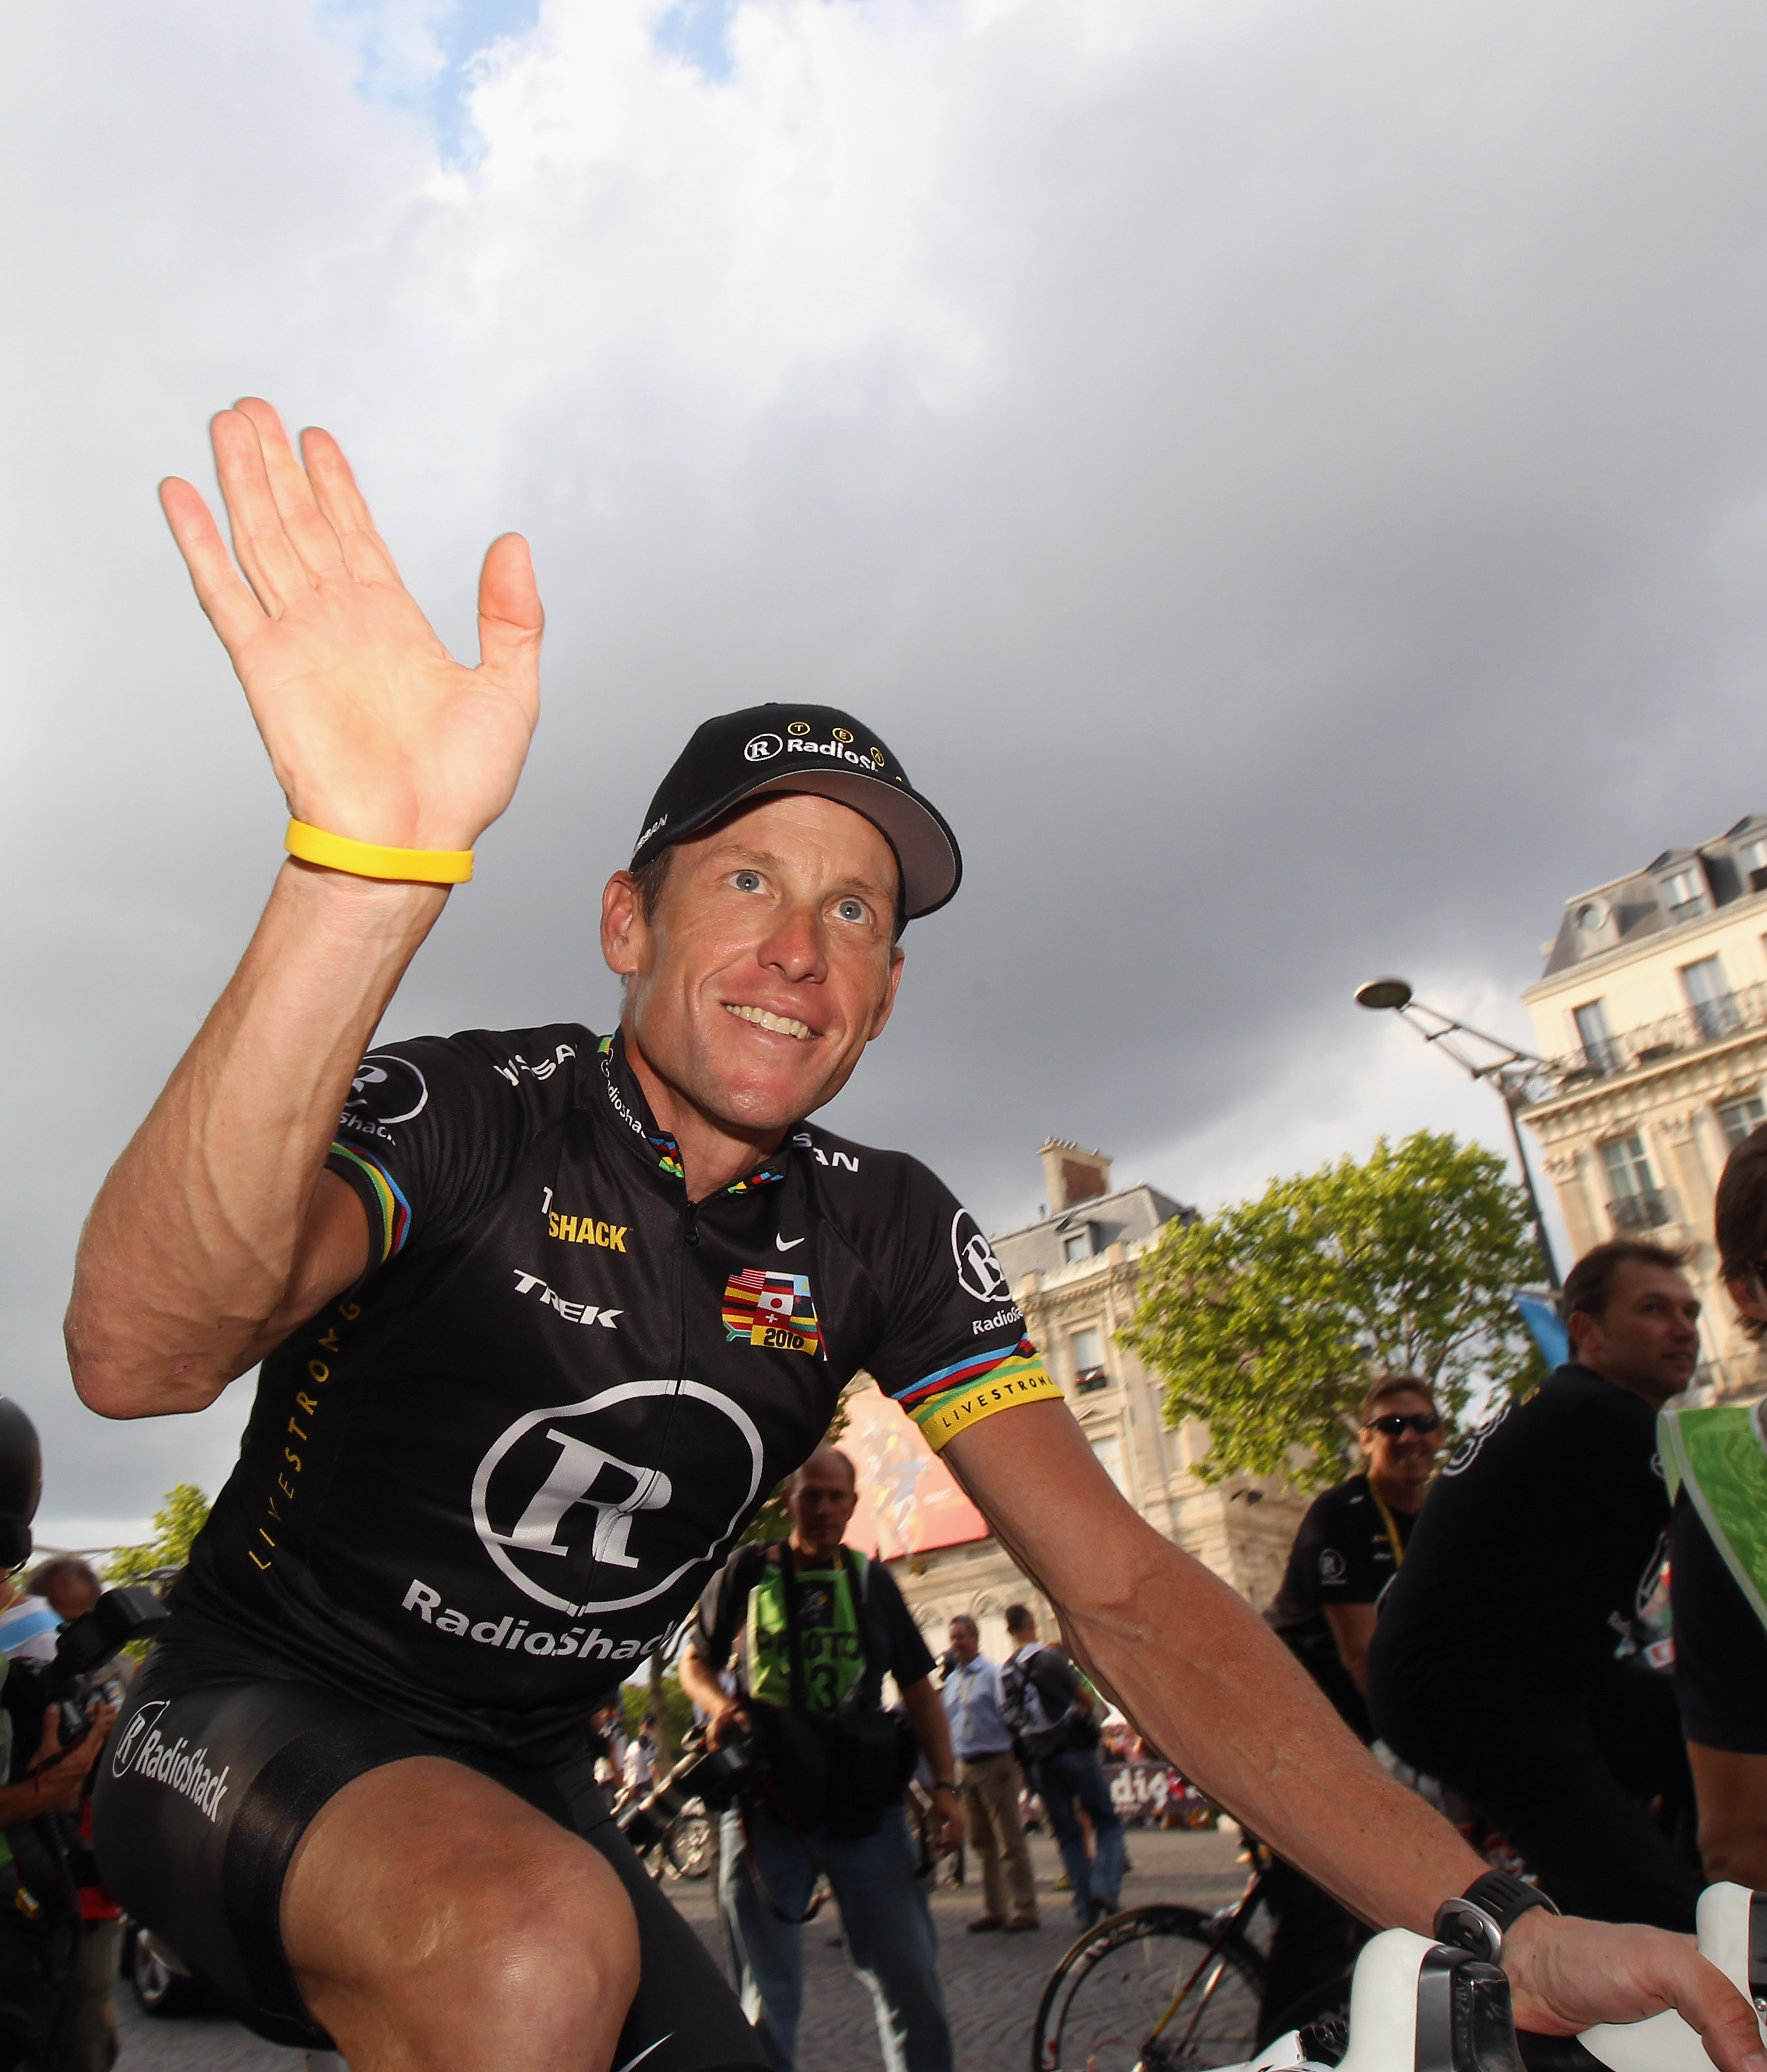 PARIS - JULY 25:  Lance Armstrong of team Radioshack waves to fans after the twentieth and final stage of Le Tour de France 2010, from Longjumeau to the Champs-Elysees in Paris on July 25, 2010 in Paris, France.  (Photo by Bryn Lennon/Getty Images)